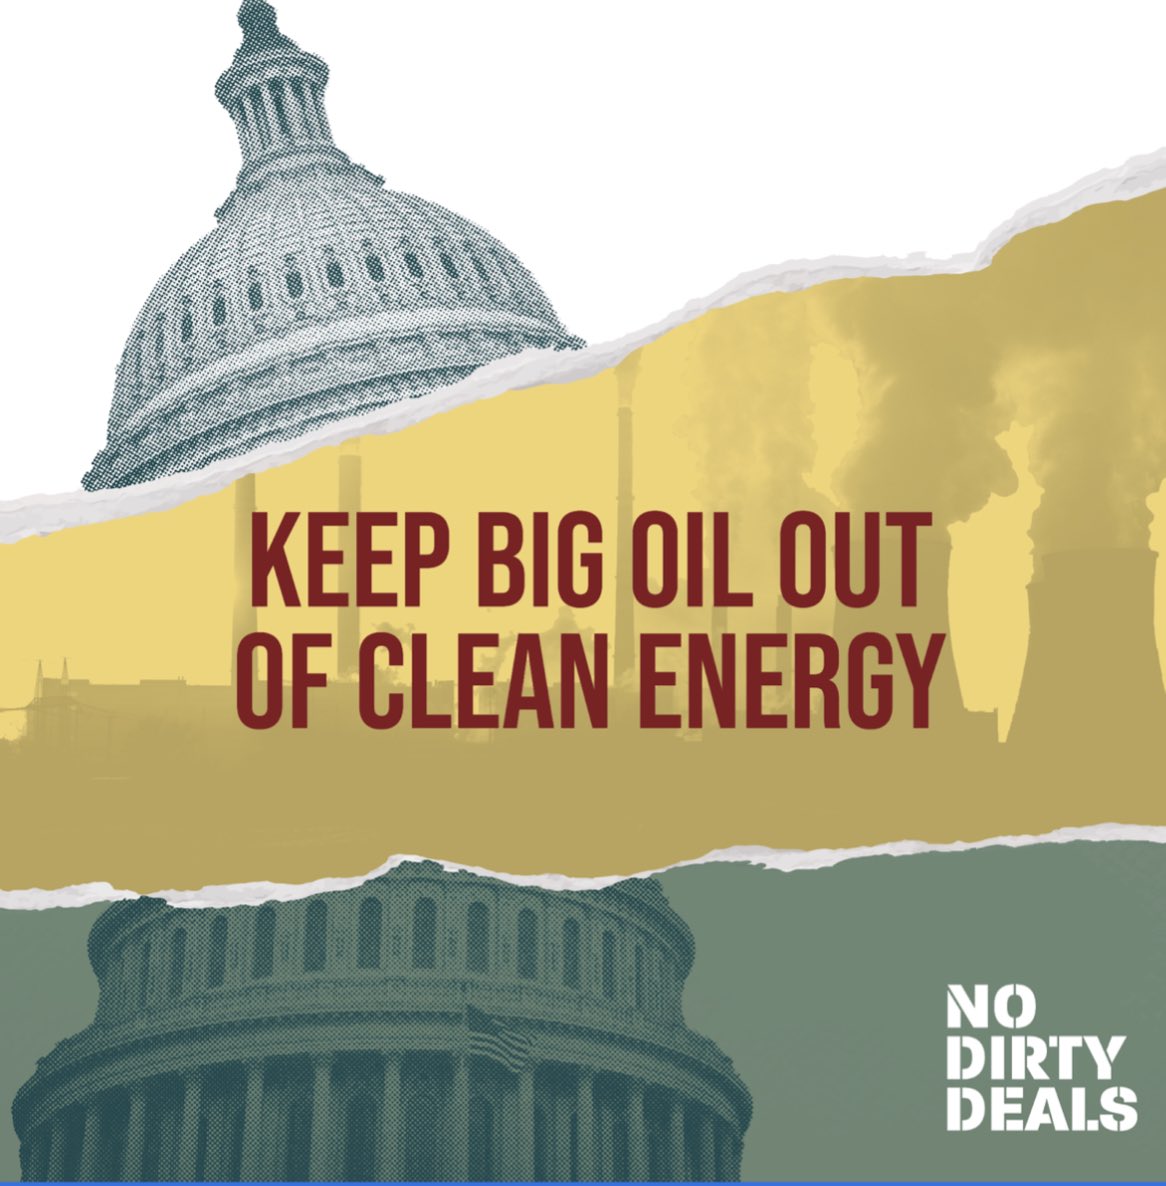 BREAKING: @POTUS & House GOP are considering a #DirtyDeal right now that would rubber stamp dangerous fossil fuel projects & silence low-income & BIPOC communities. @ShalandaYoung46, & @SRicchetti46 – don’t make compromises that sacrifice our communities. #PeopleOverPolluters